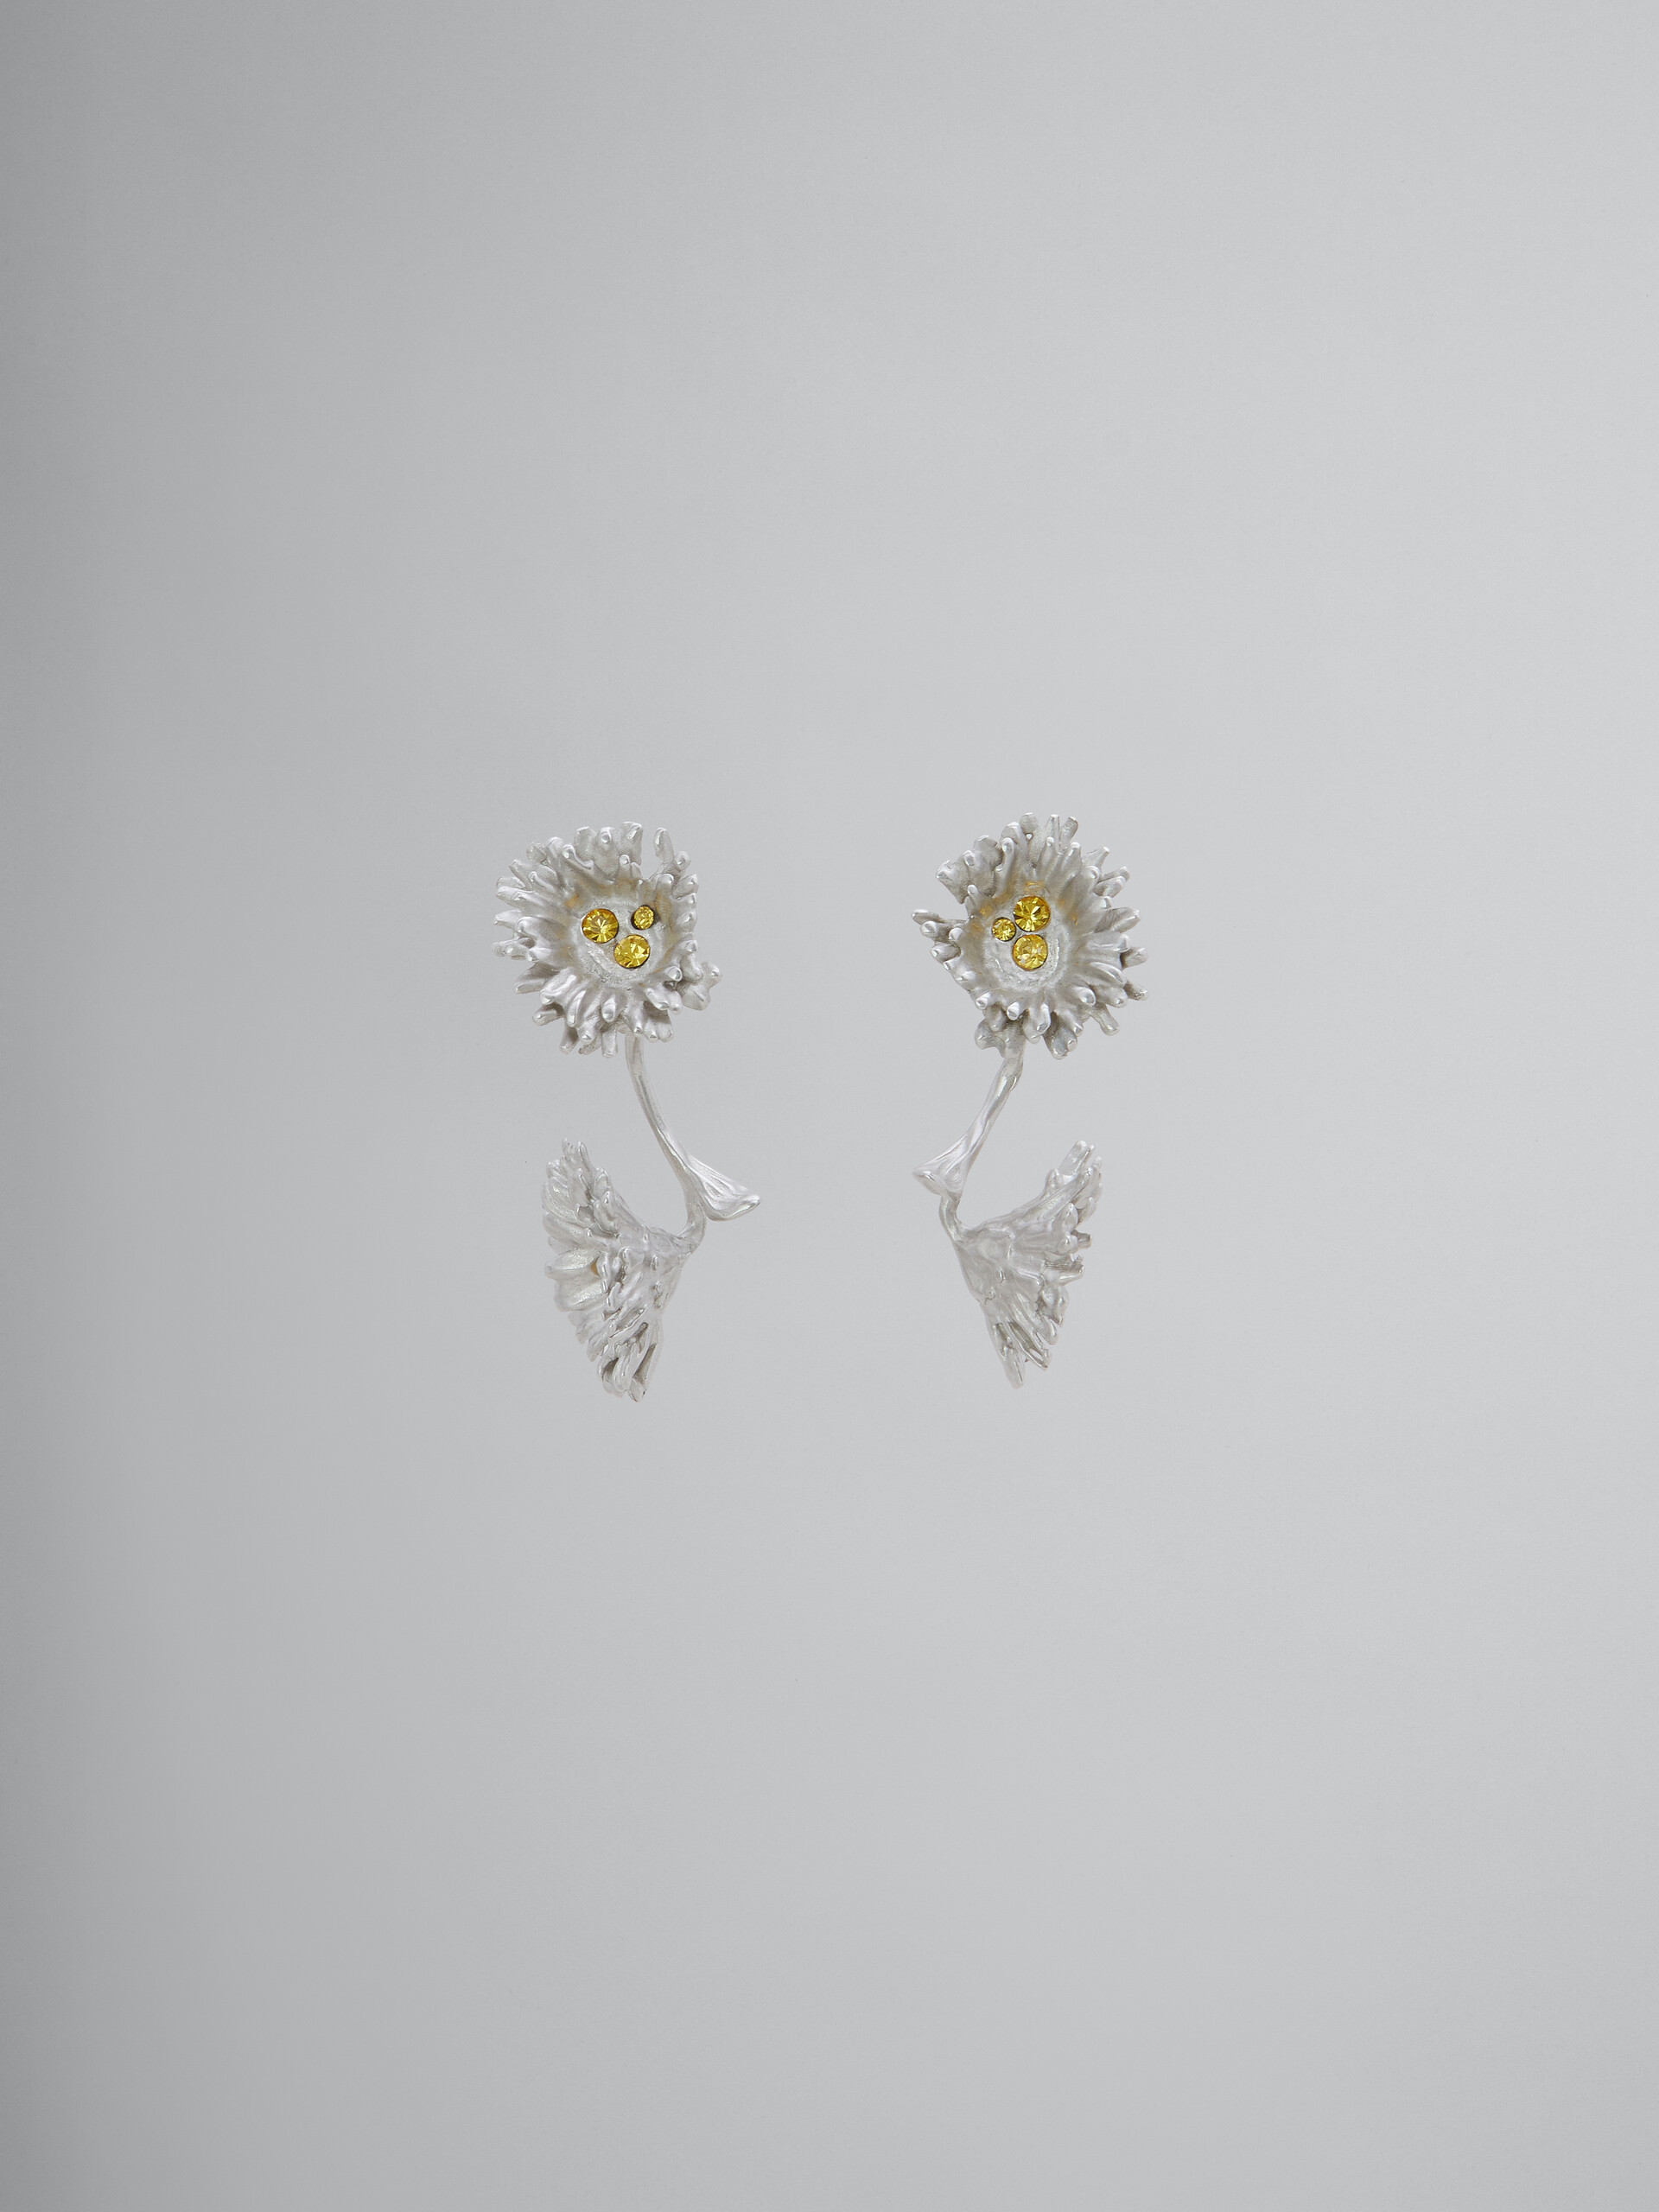 Metal daisy earrings with crystals - Earrings - Image 1